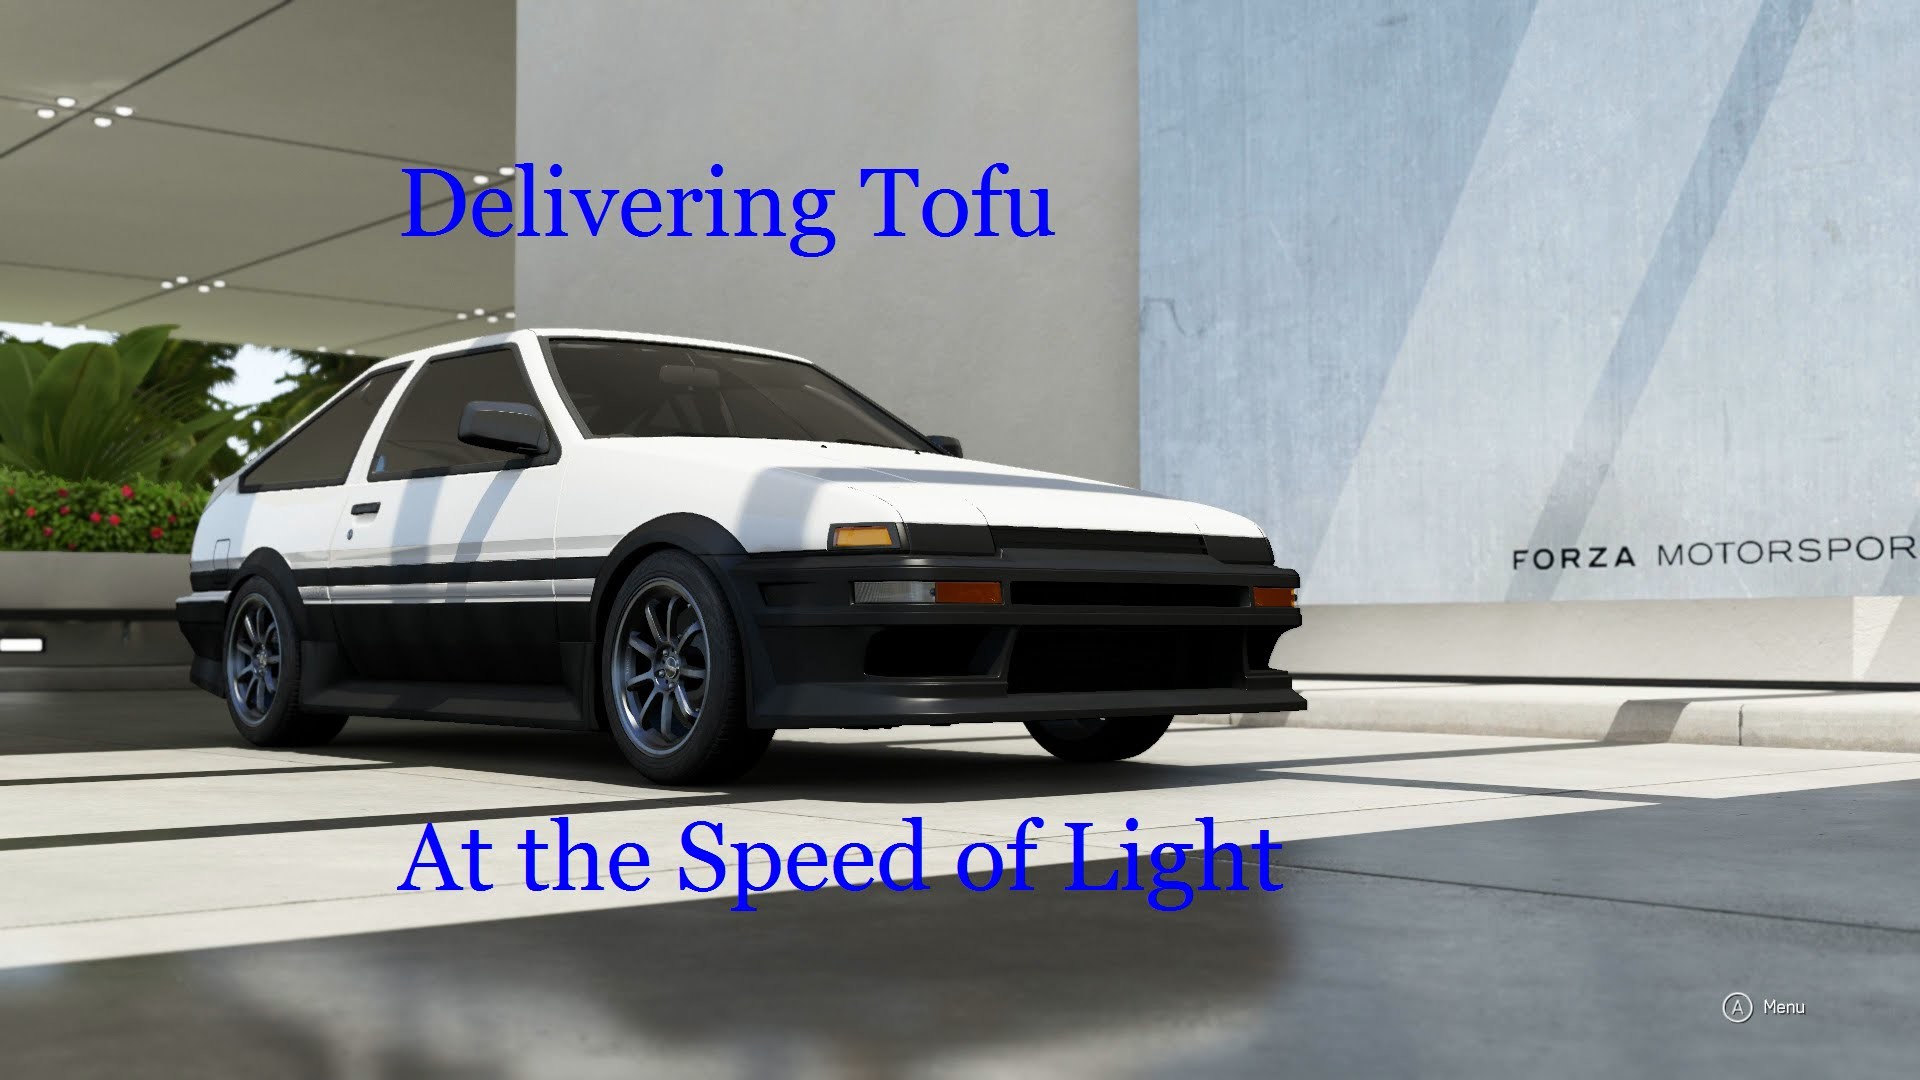 1920x1080 Forza 6 / Drift AE86 build with tune